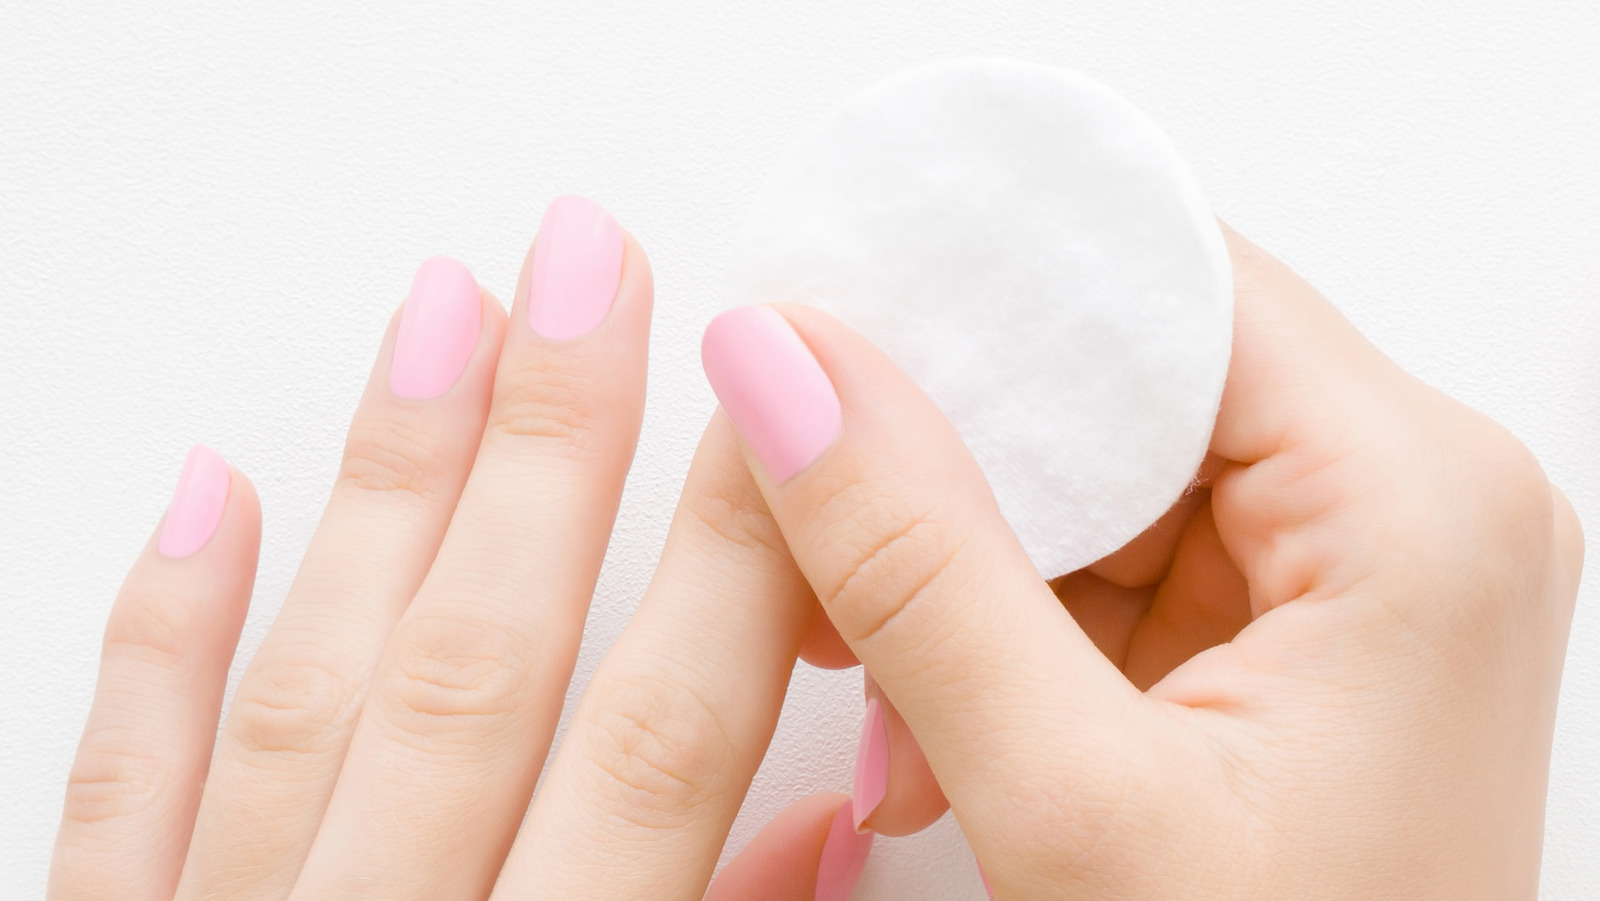 What Really Happens To Your Body When You Inhale Nail Polish Remover Fumes